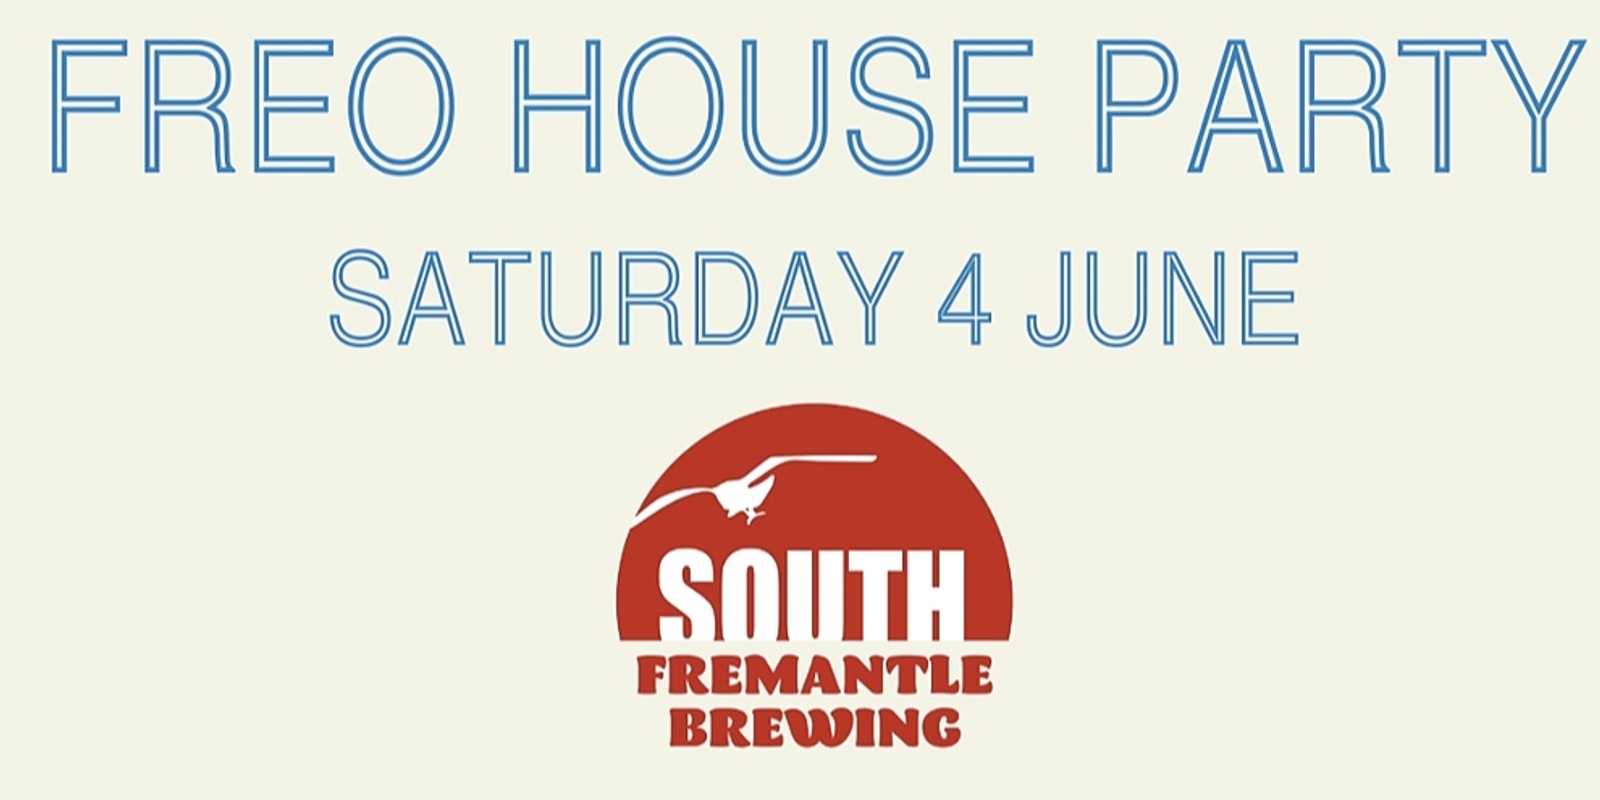 Banner image for Freo House Party & Collaboration Beer Launch